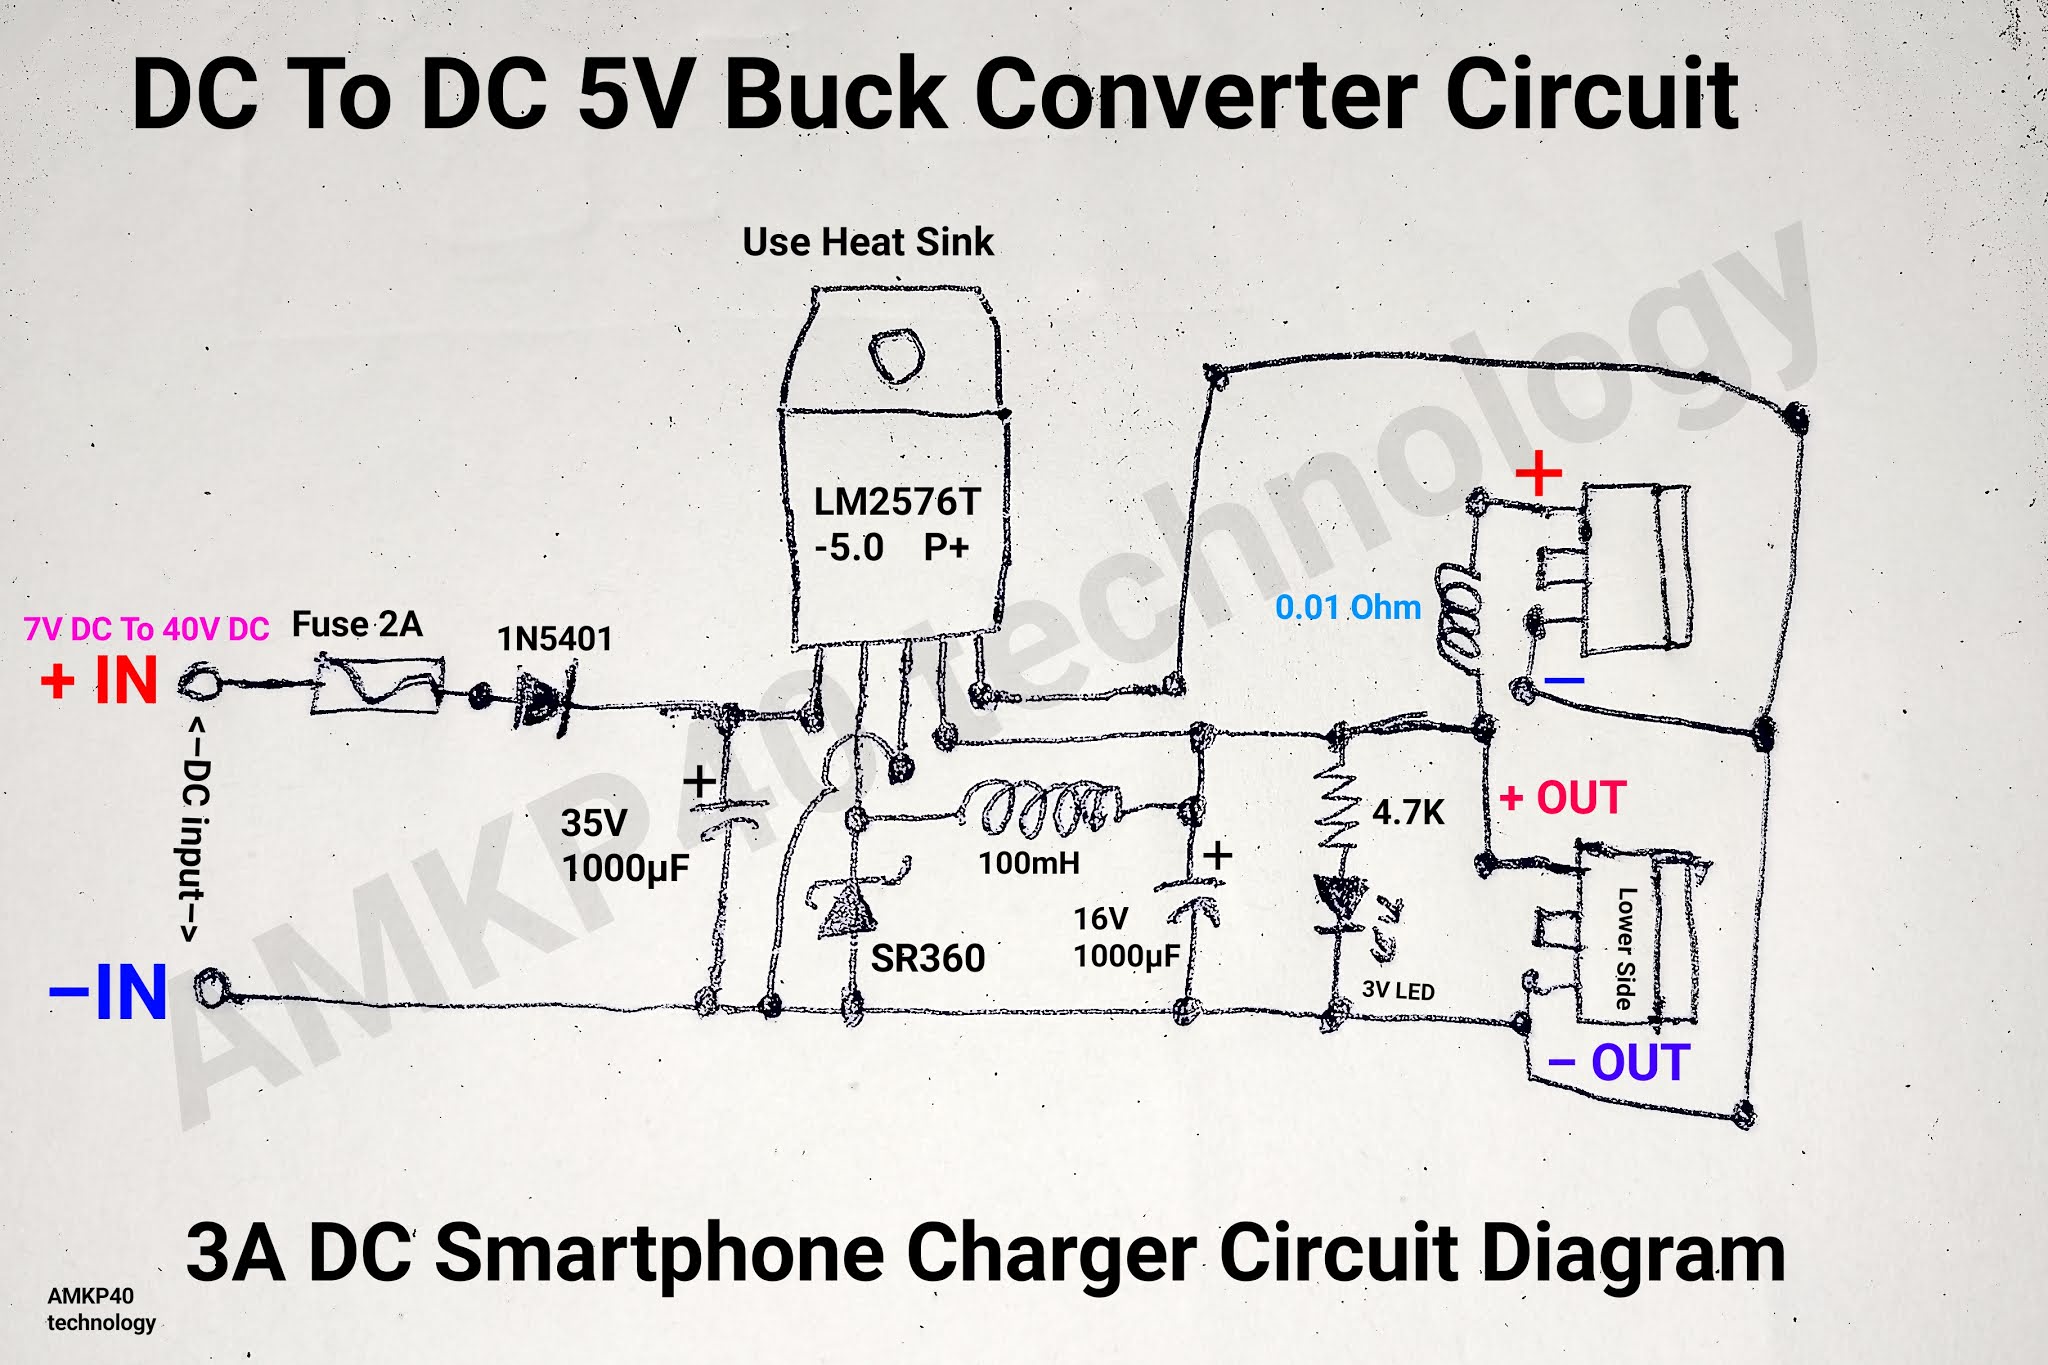 DC To DC 5V 3A Buck Converter Circuit Diagram, or 3A DC Smartphone